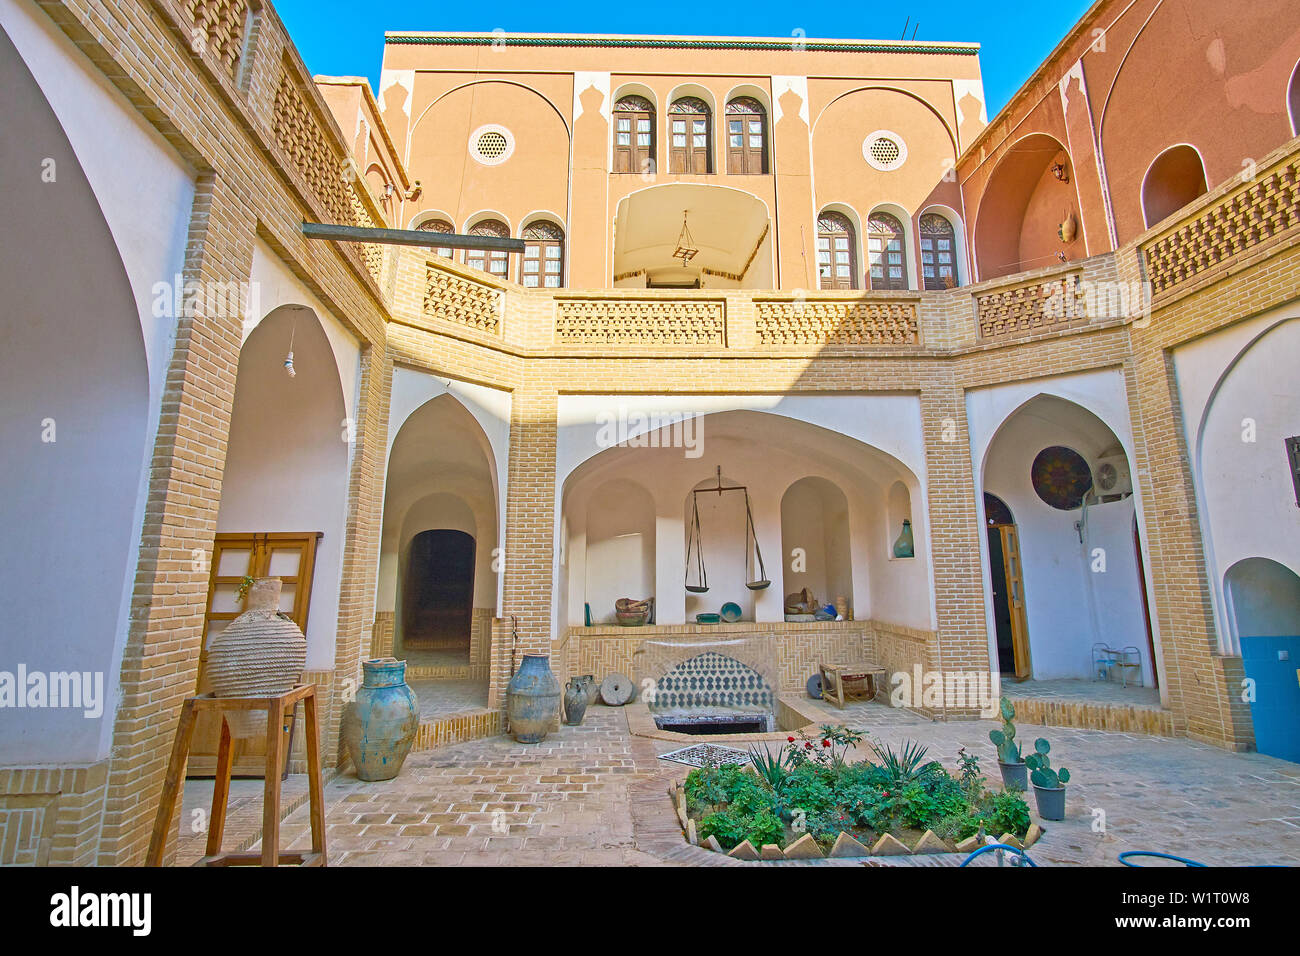 KASHAN, IRAN - OCTOBER 23, 2017: The shady courtyard of traditional Iranian house with many narrow corridors, to provide cool air and wind, on October Stock Photo